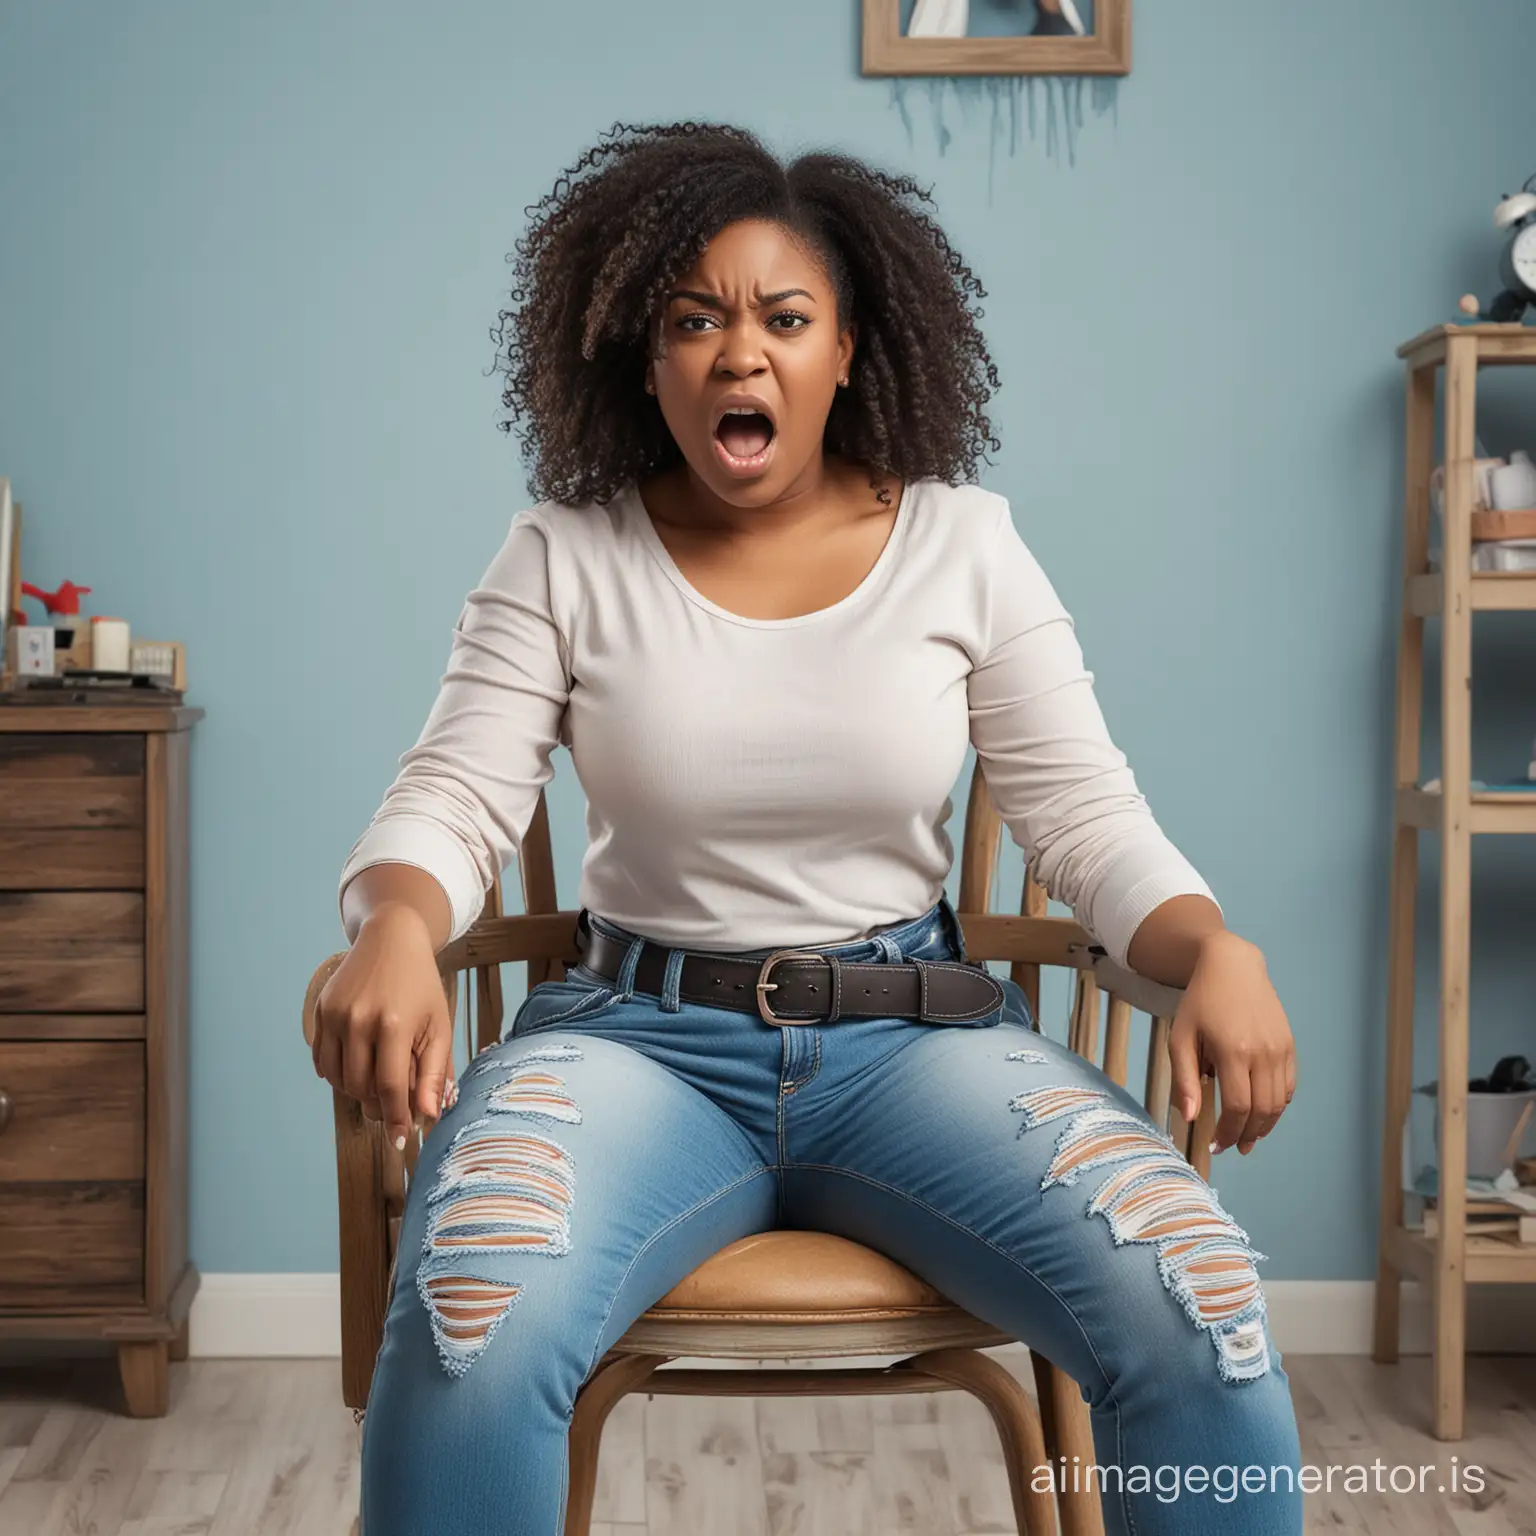 real photo of a curvy young black mother in rage,sitting on a chair,angry face,ripped blue faded tight jeans with belt,messy children's room,extremely realistic,skin features,scolding severely the viewer